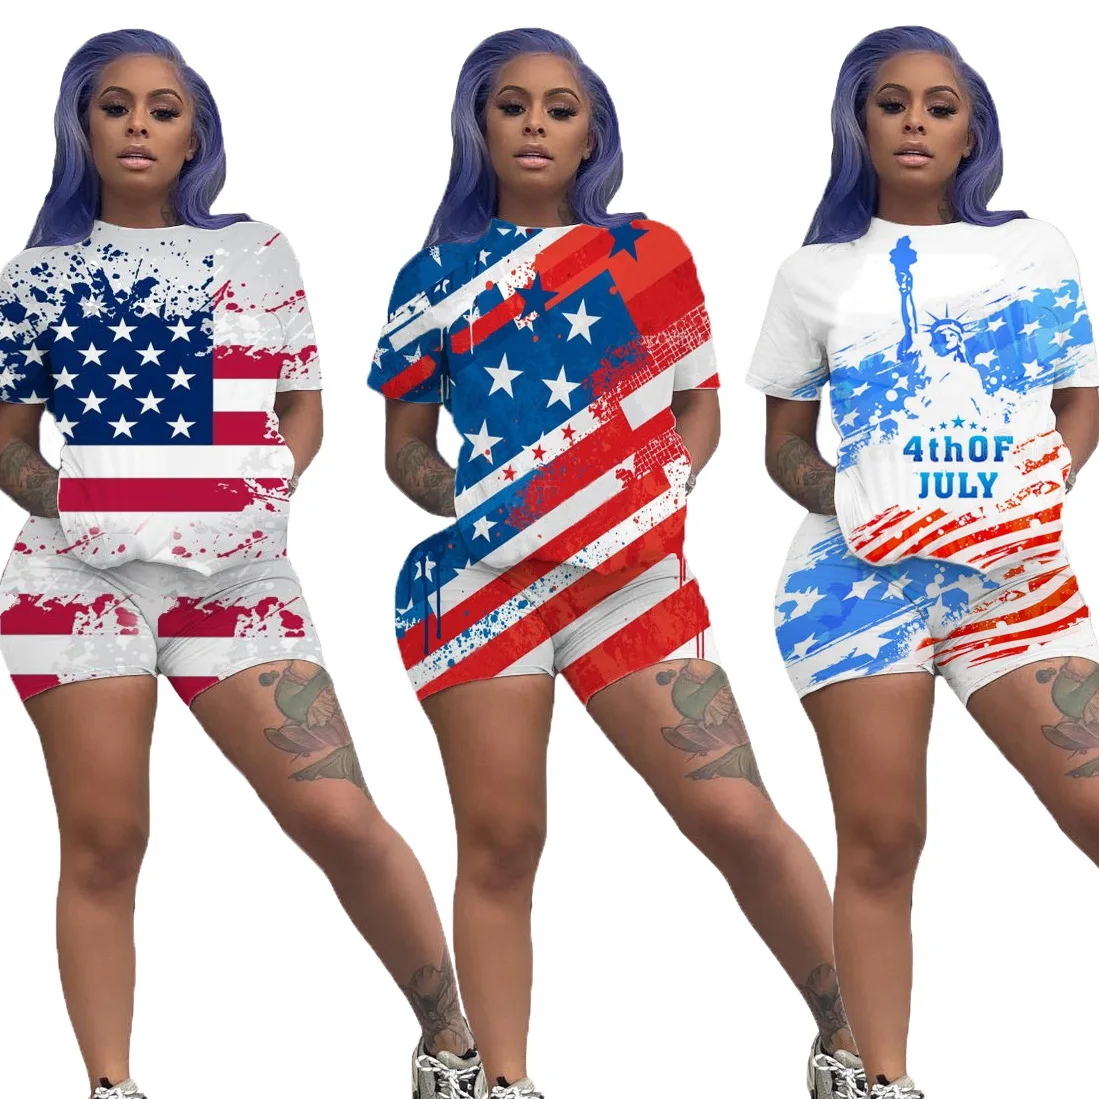 

F21341A 2020 new design America Independence Day National Day printed short sleeve women two-piece set women set, #1,#2,#3